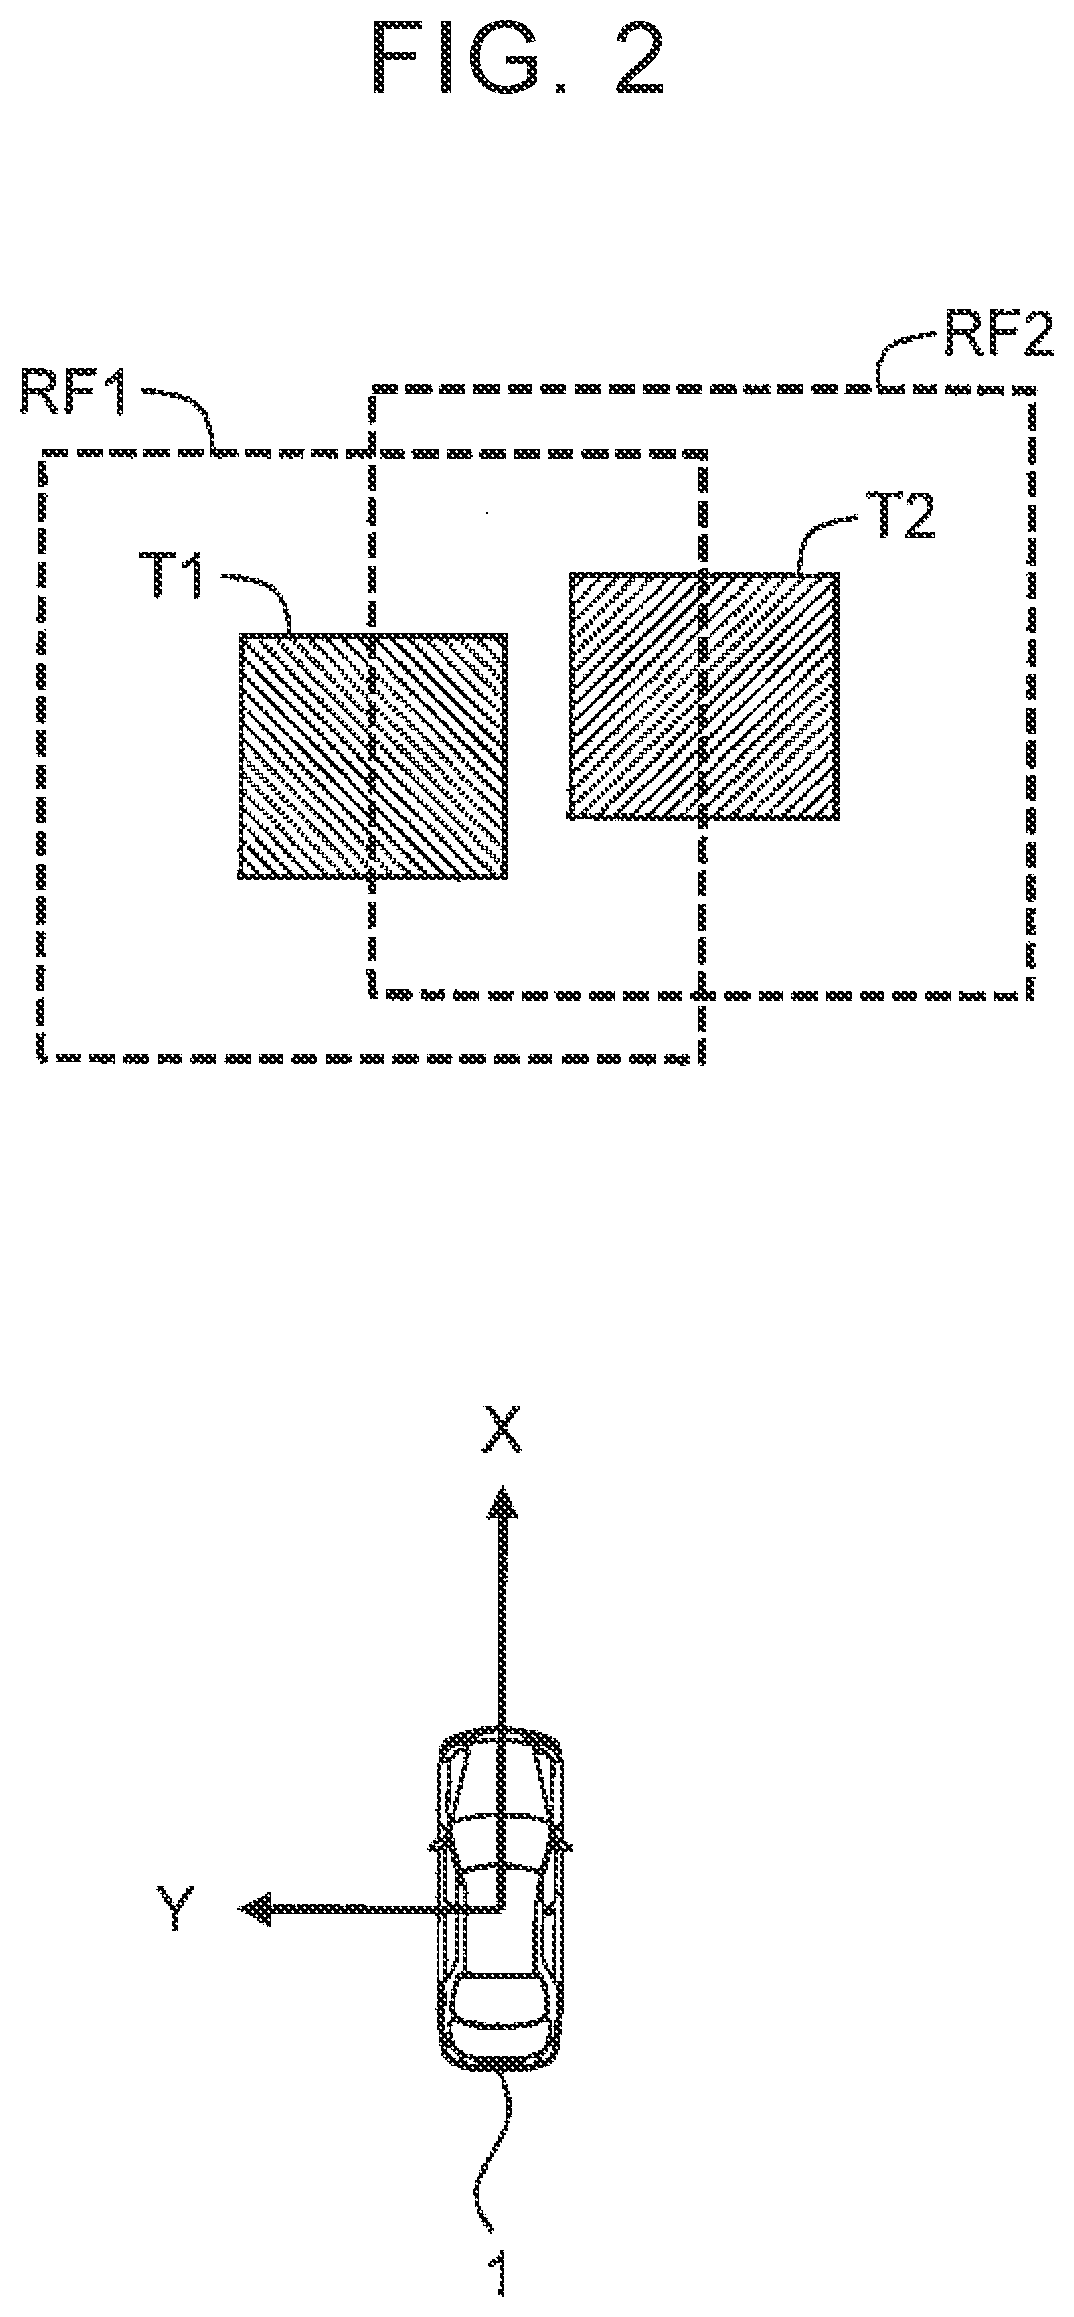 Object recognition device